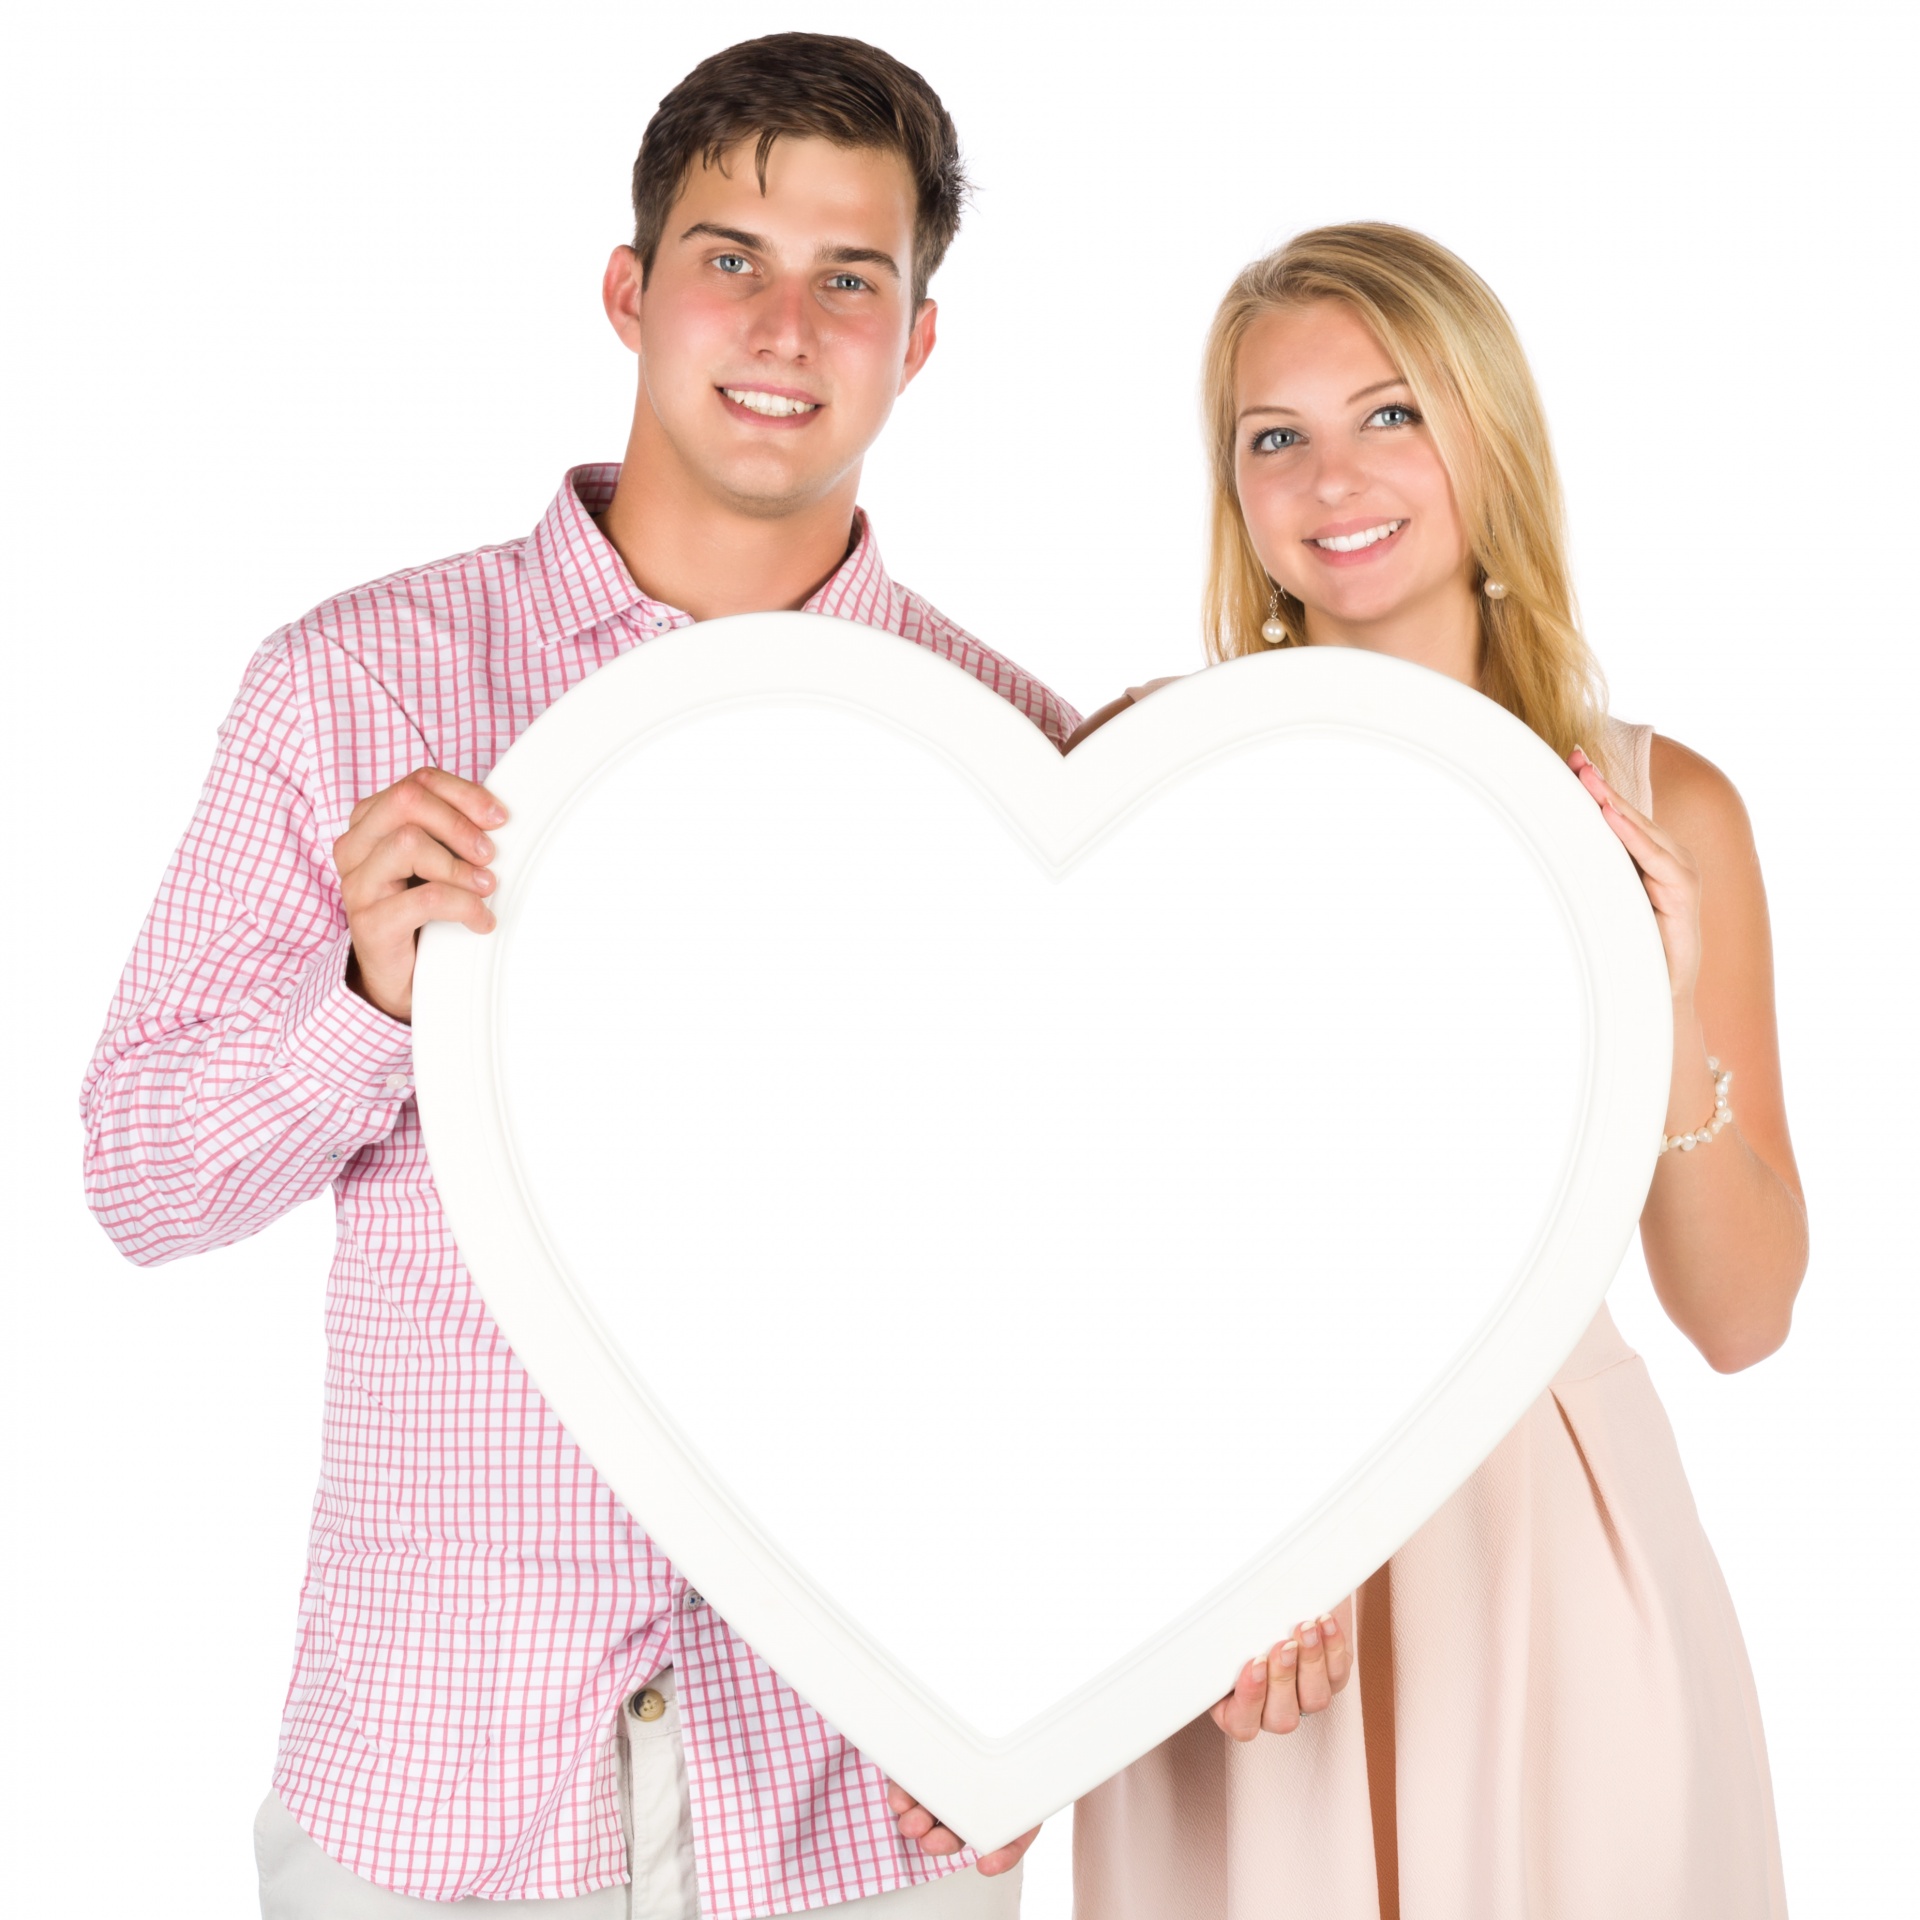 https://www.publicdomainpictures.net/pictures/210000/velka/young-couple-with-a-heart-1485860963Mdn.jpg